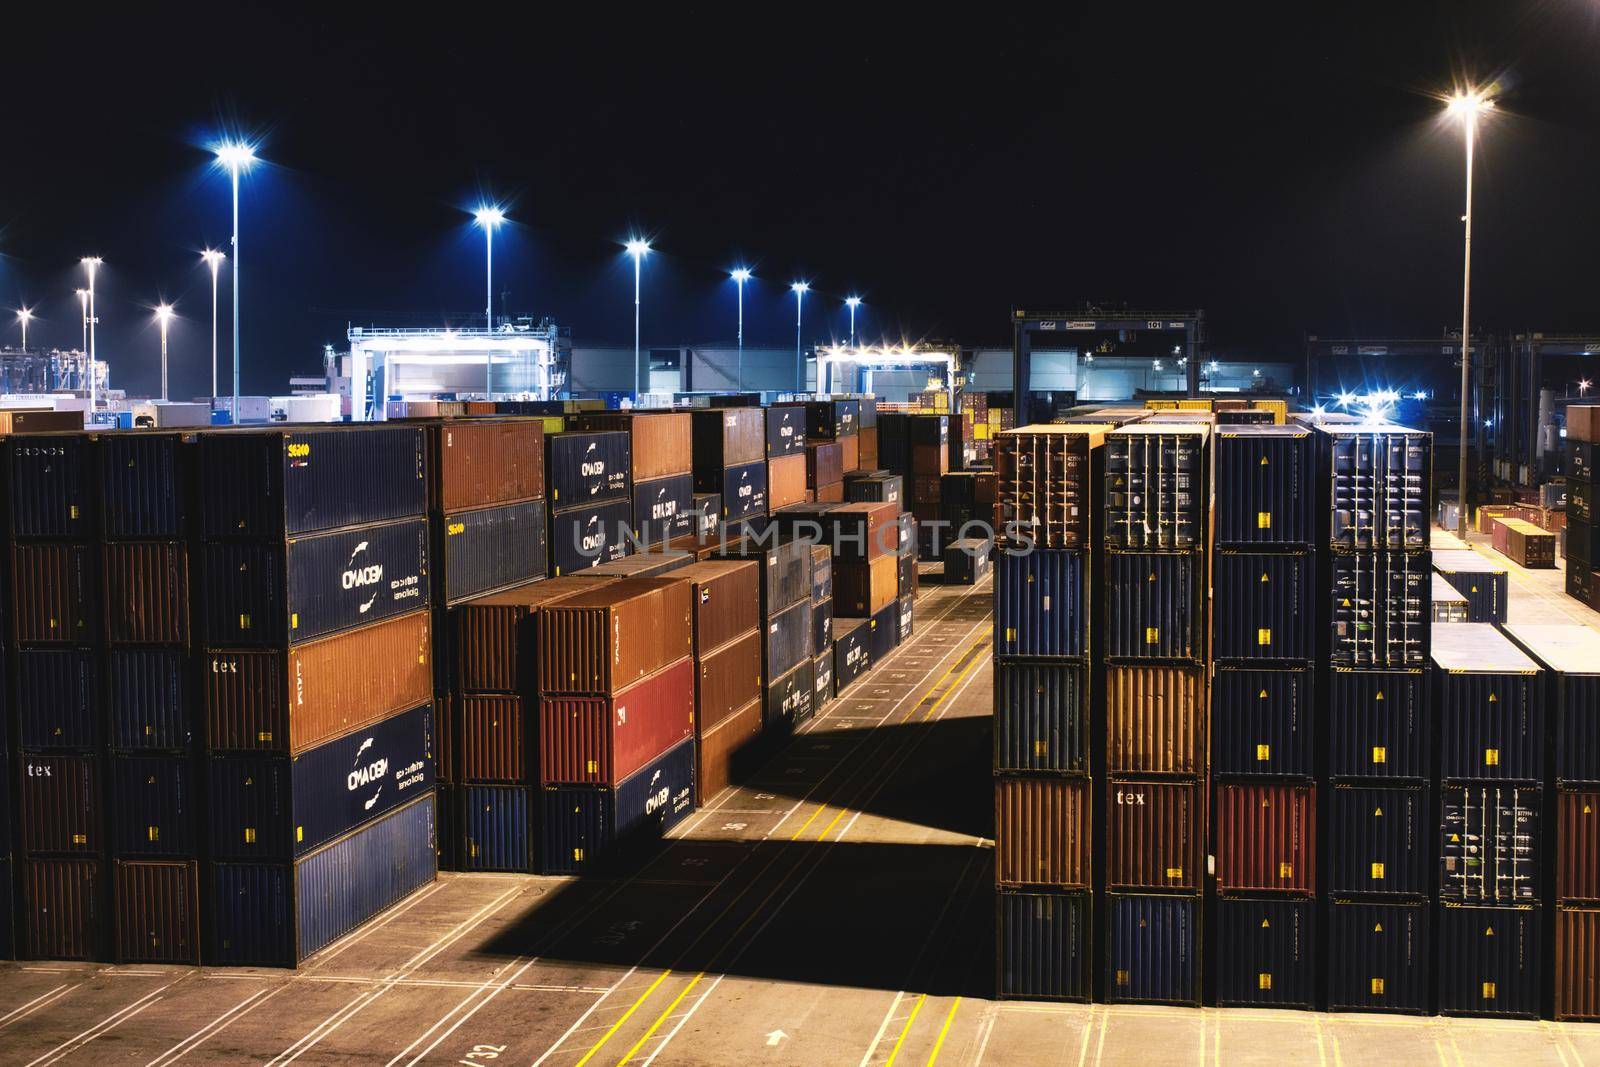 25 April 2022 - Birzebbuga, Malta: Shipping containers containing commercial cargo stacked in a transhipment hub depot at night